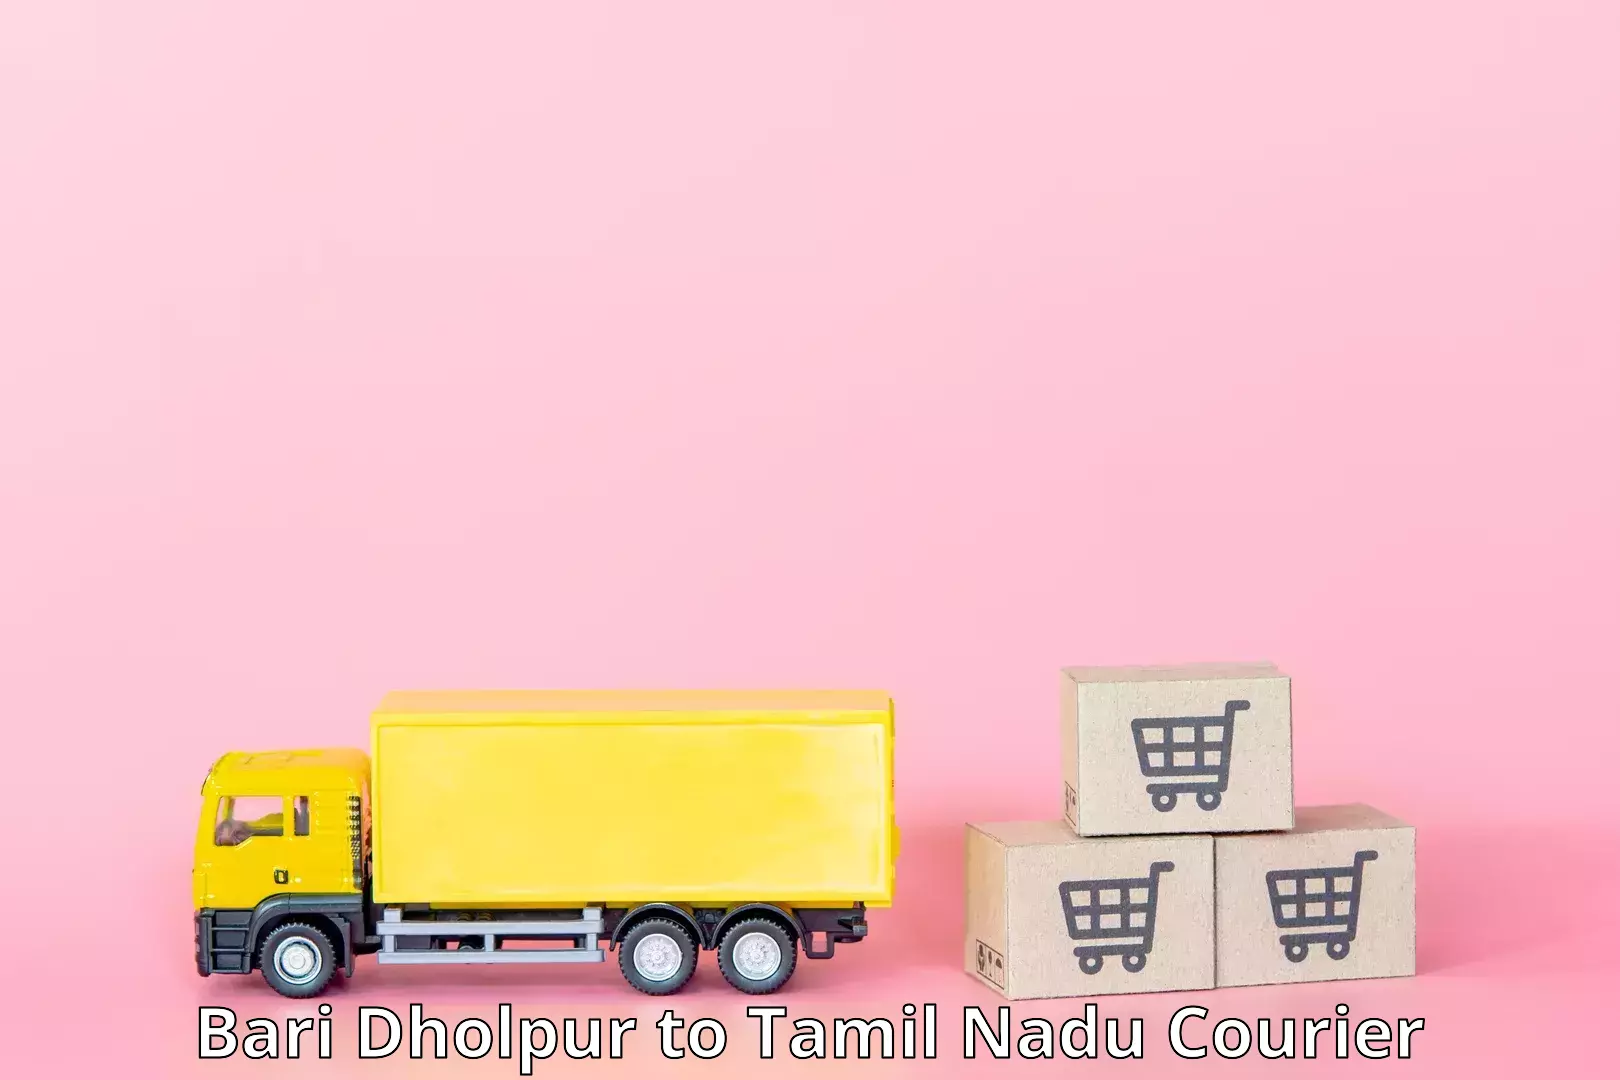 Round-the-clock parcel delivery Bari Dholpur to Kovilpatti